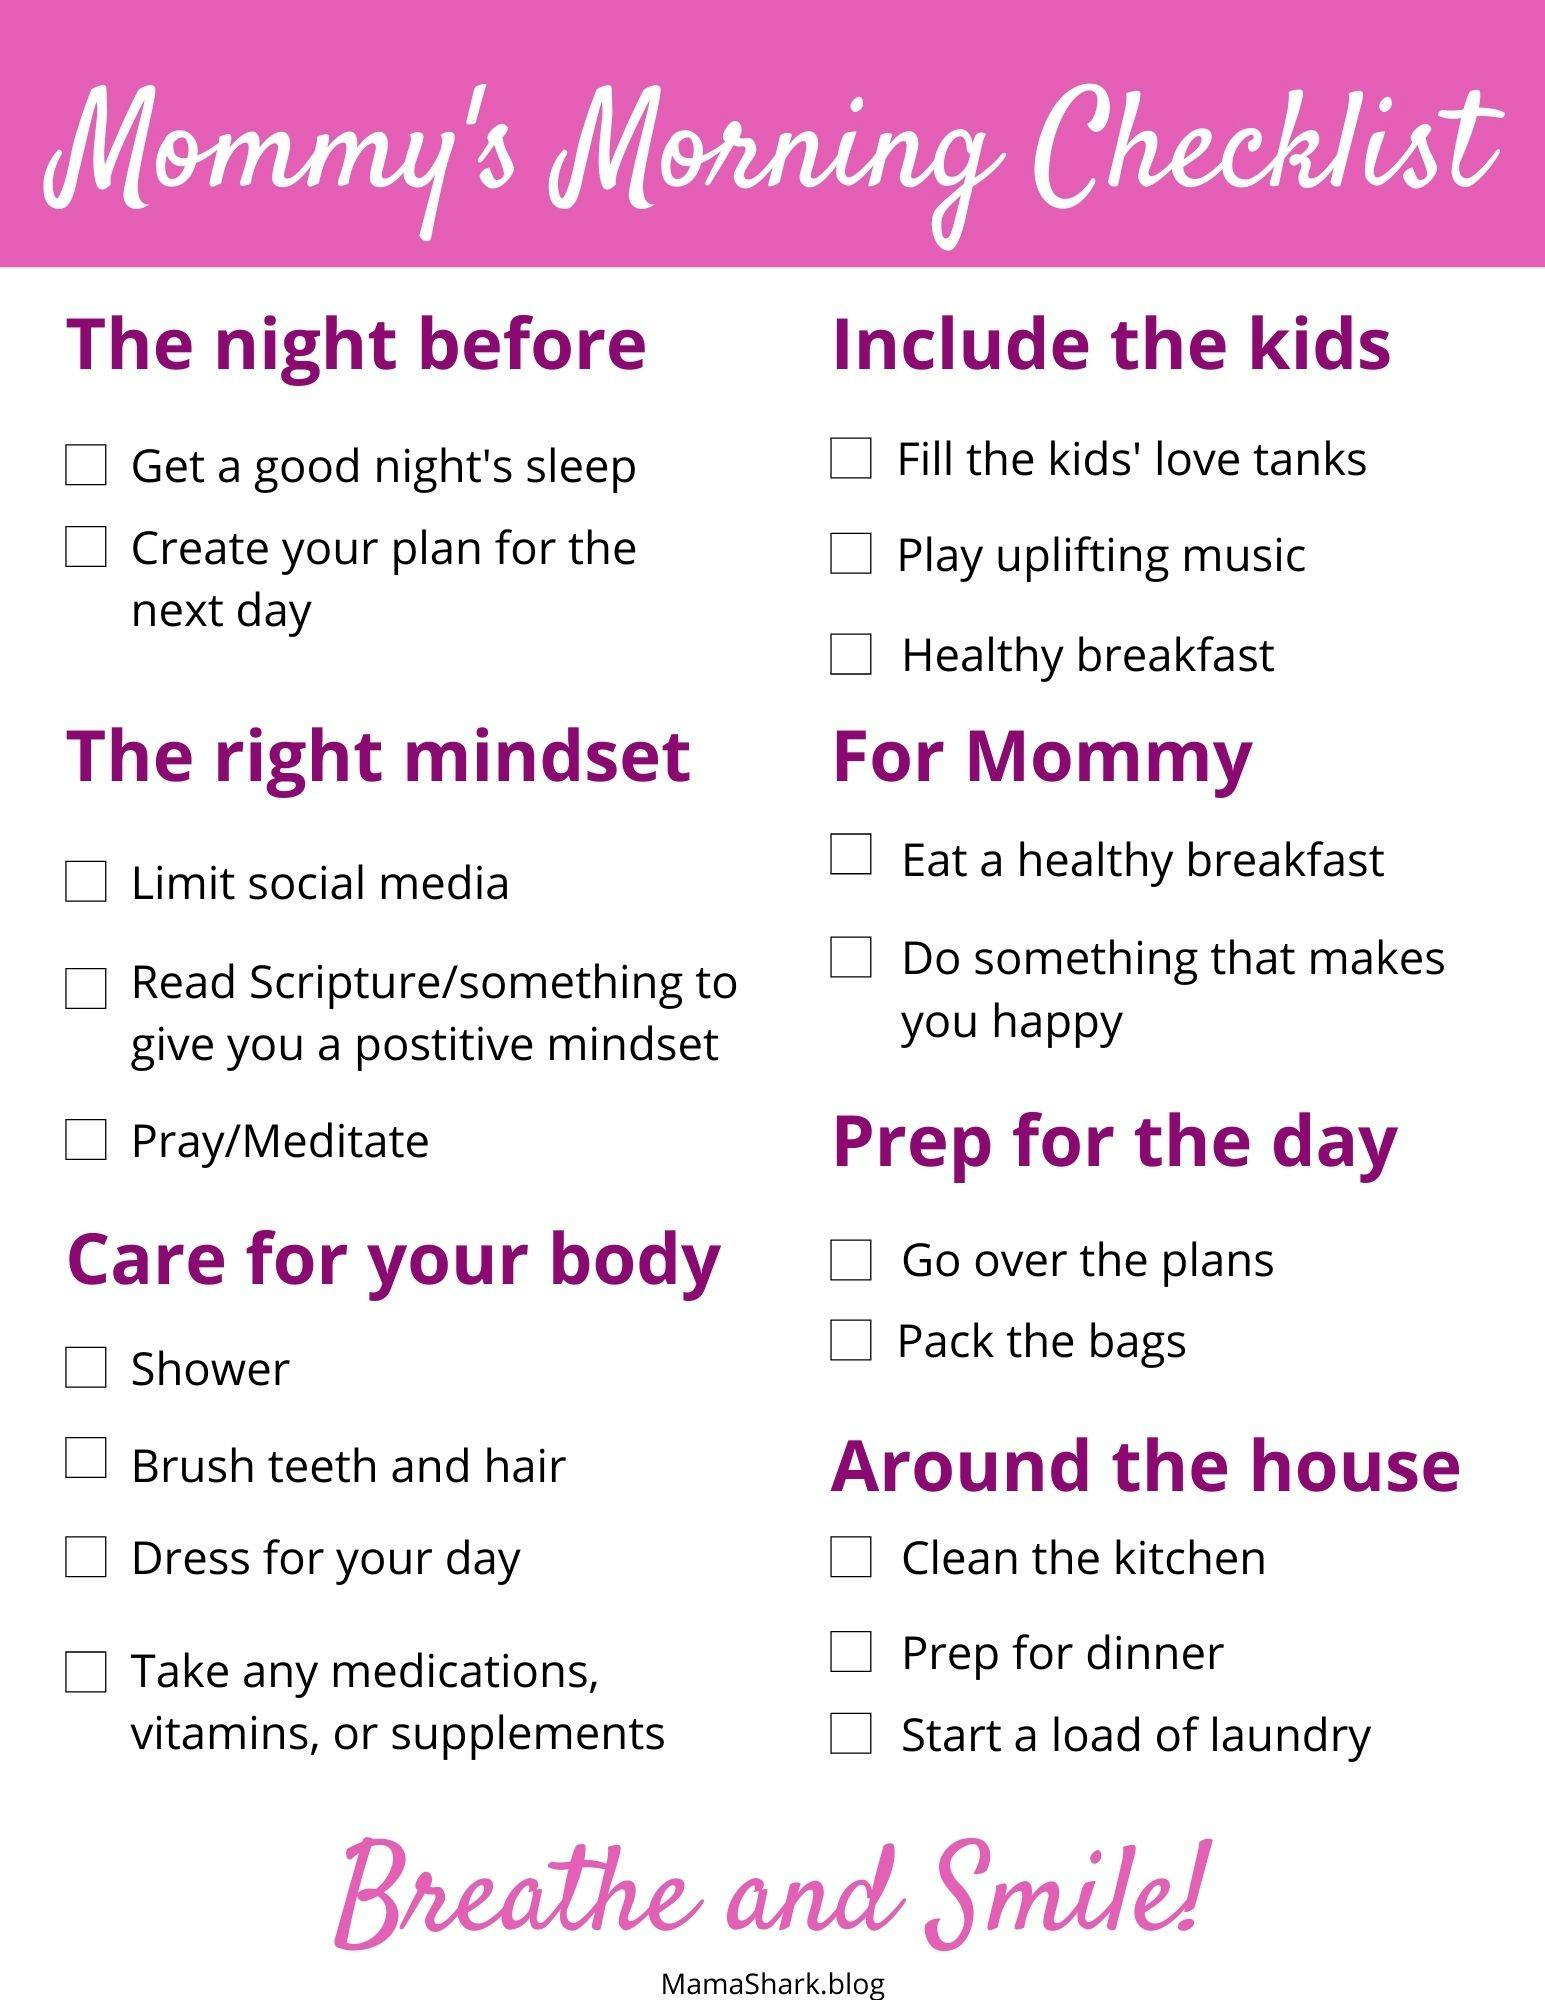 Make over your mornings with our Mom Morning Routine Checklist!